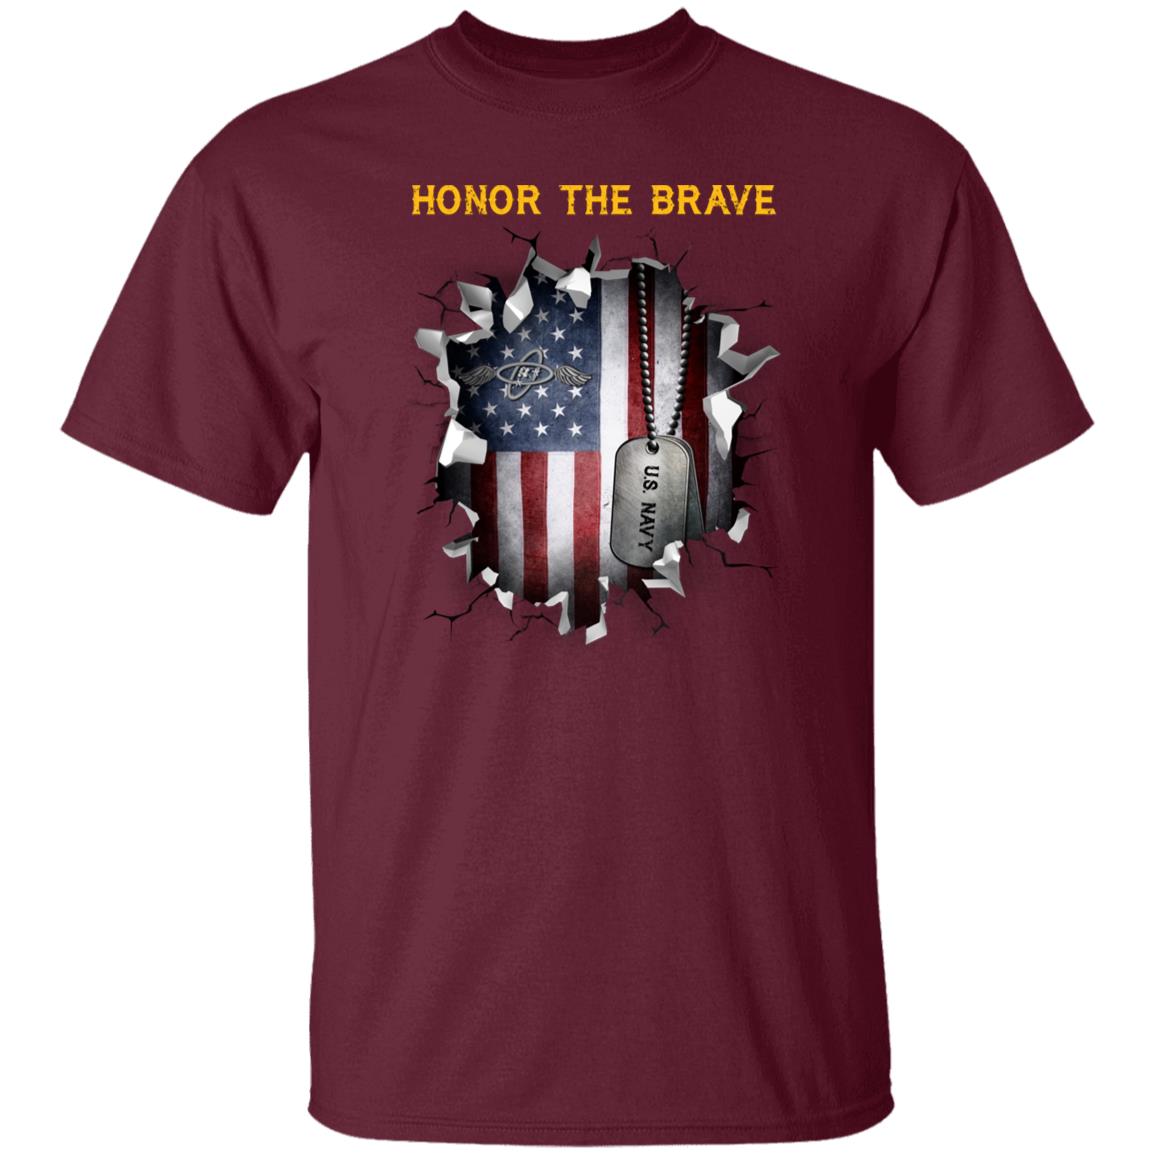 Navy Aviation Electronics Technician Navy AT - Honor The Brave Front Shirt